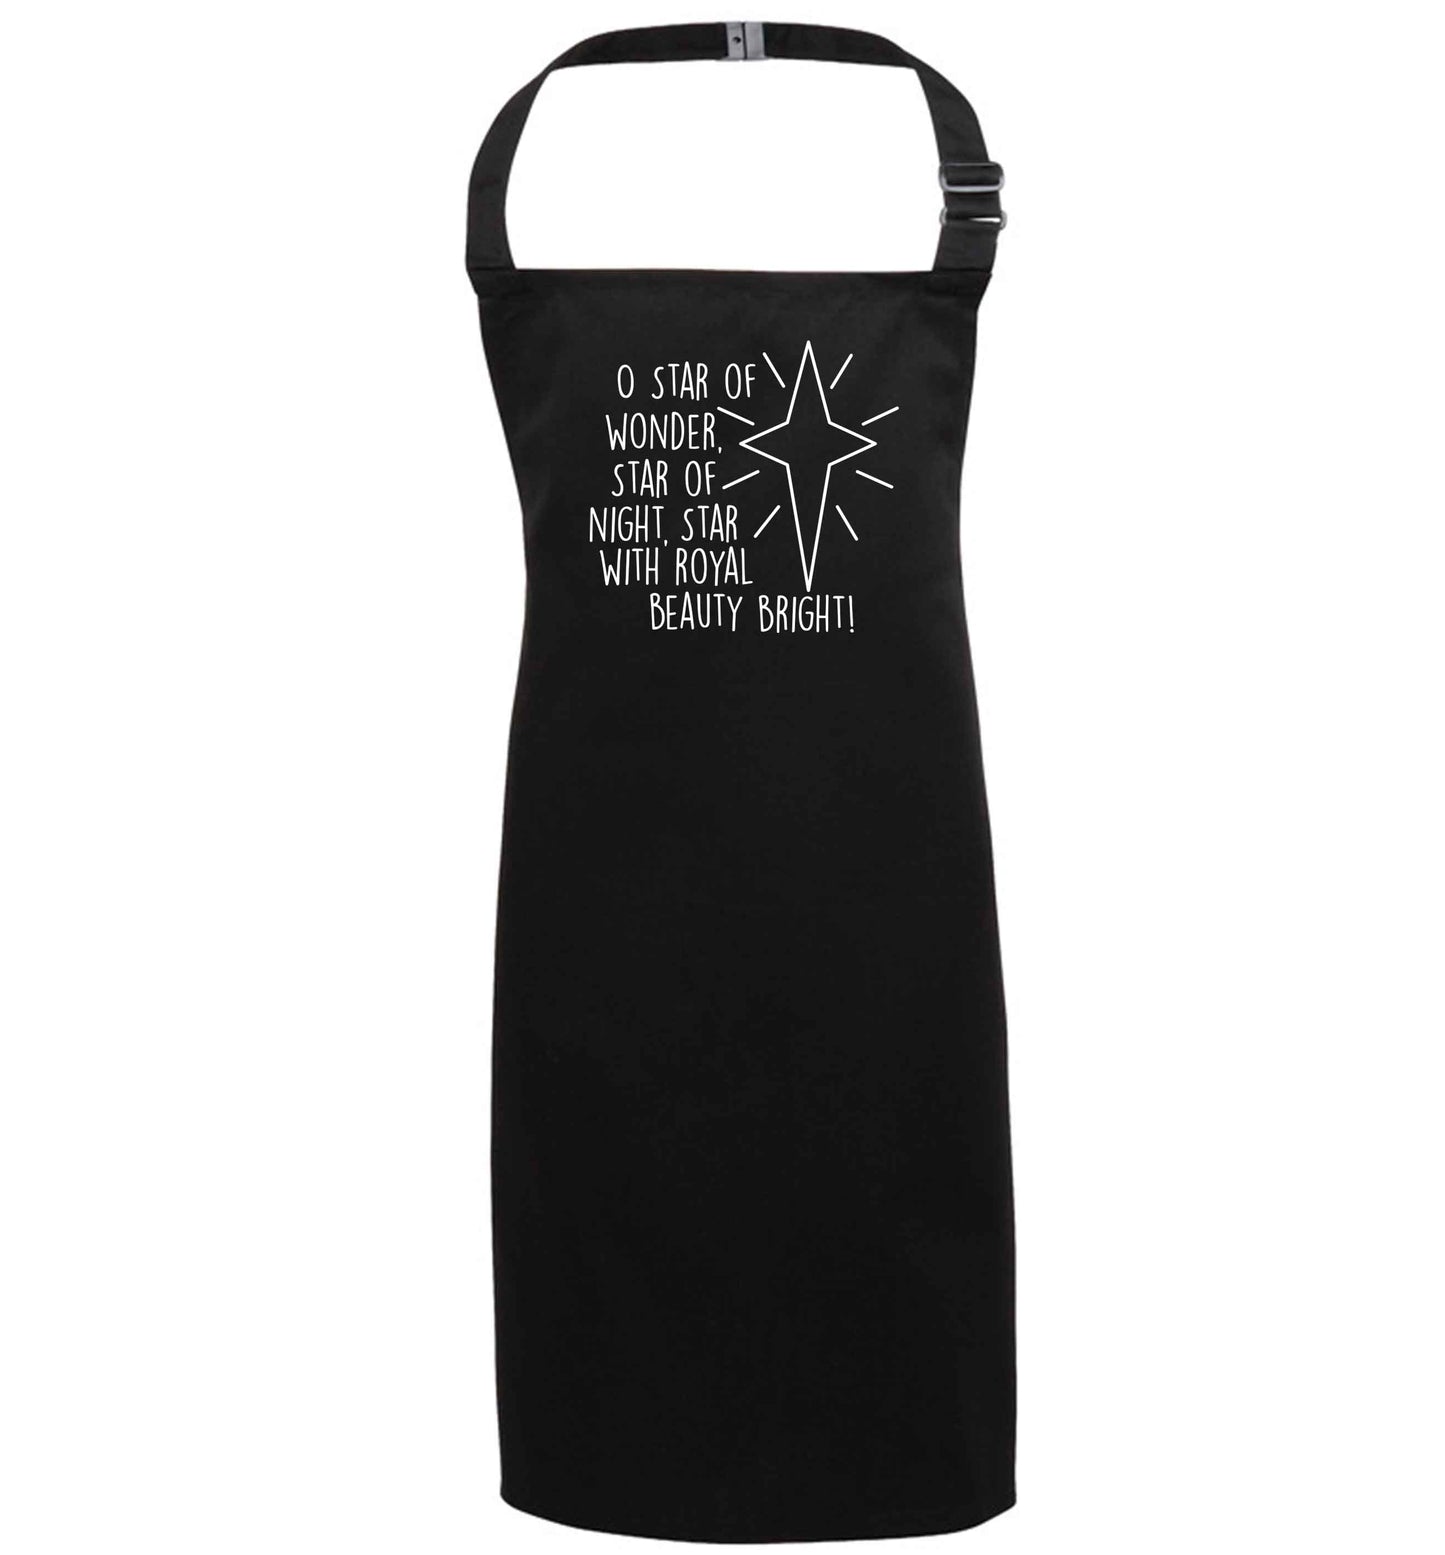 Oh star of wonder star of night, star with royal beauty bright black apron 7-10 years